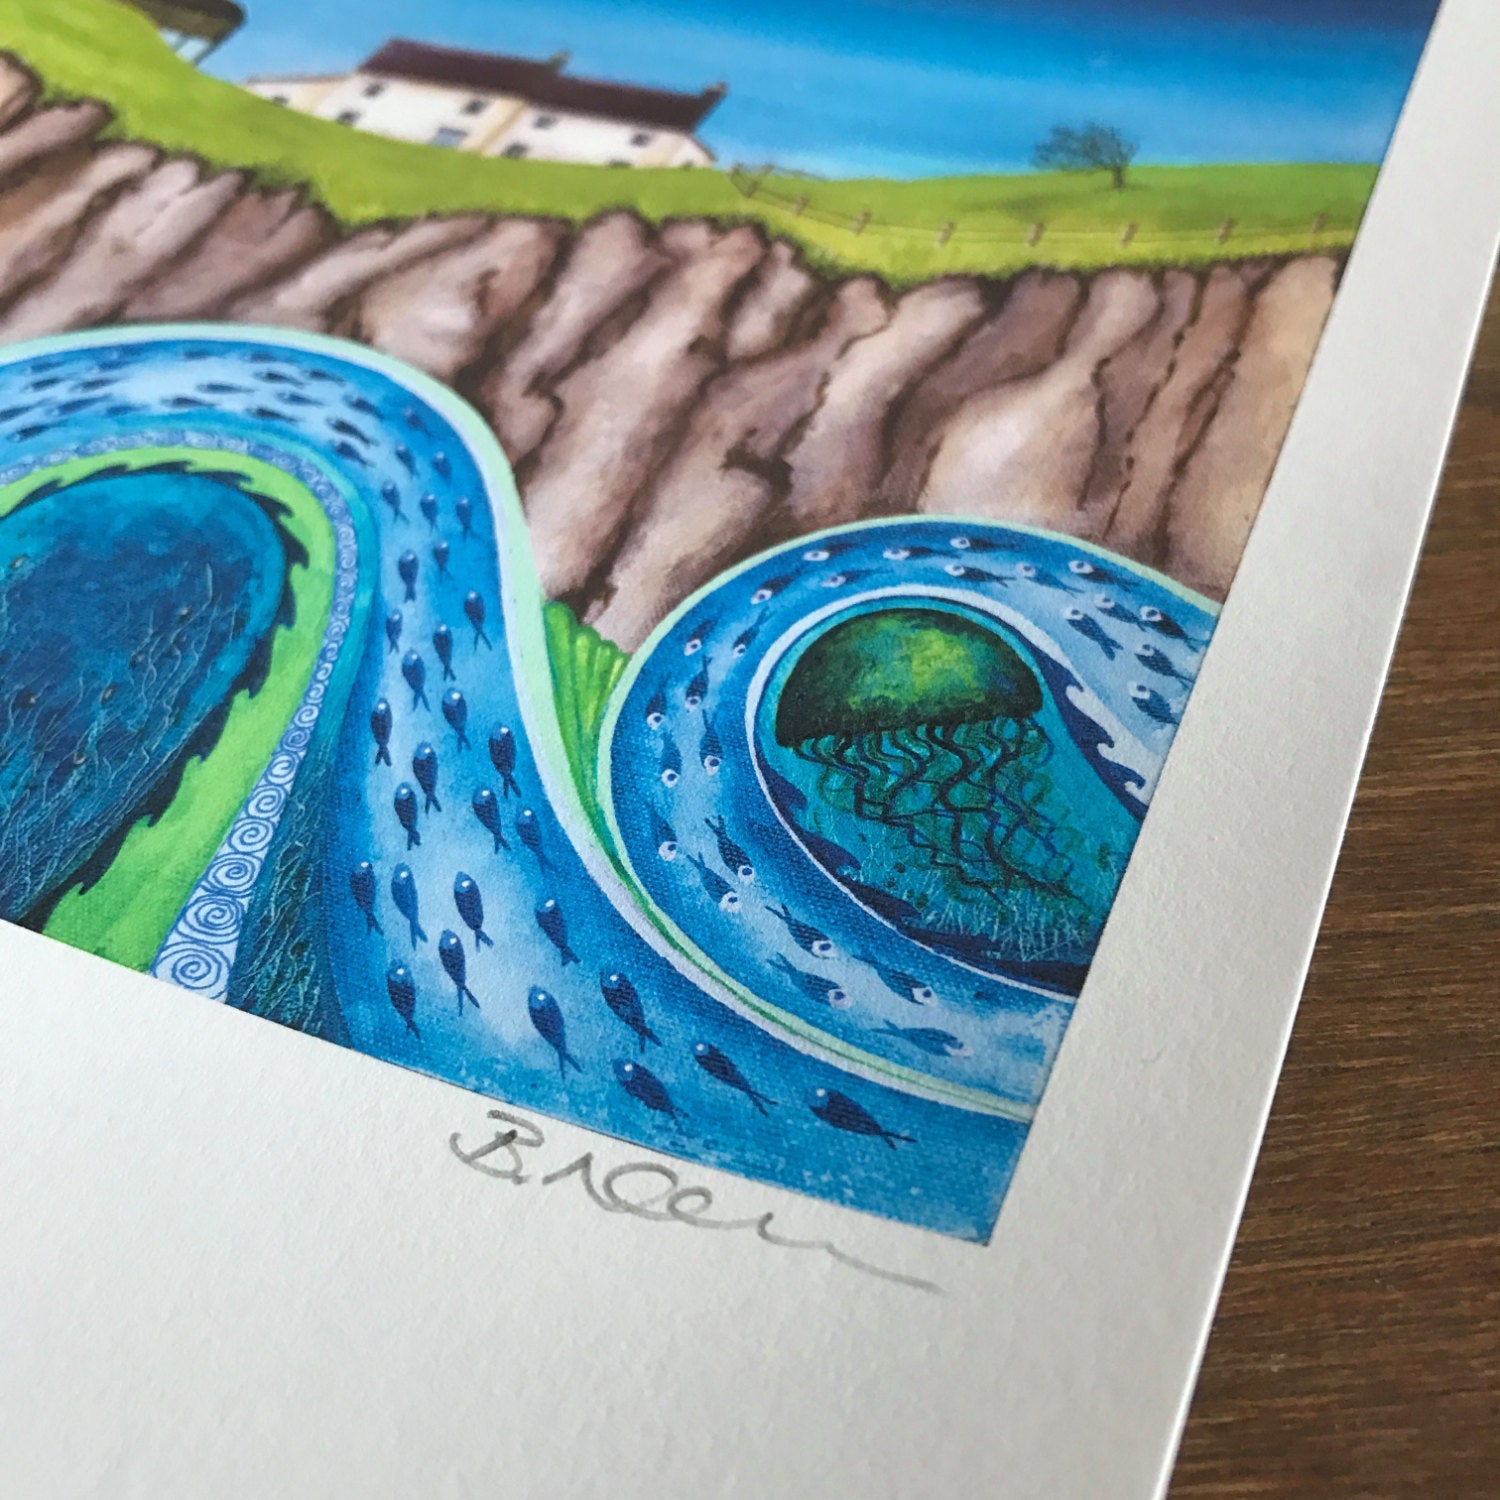 The Rising Swell - Limited Edition Print